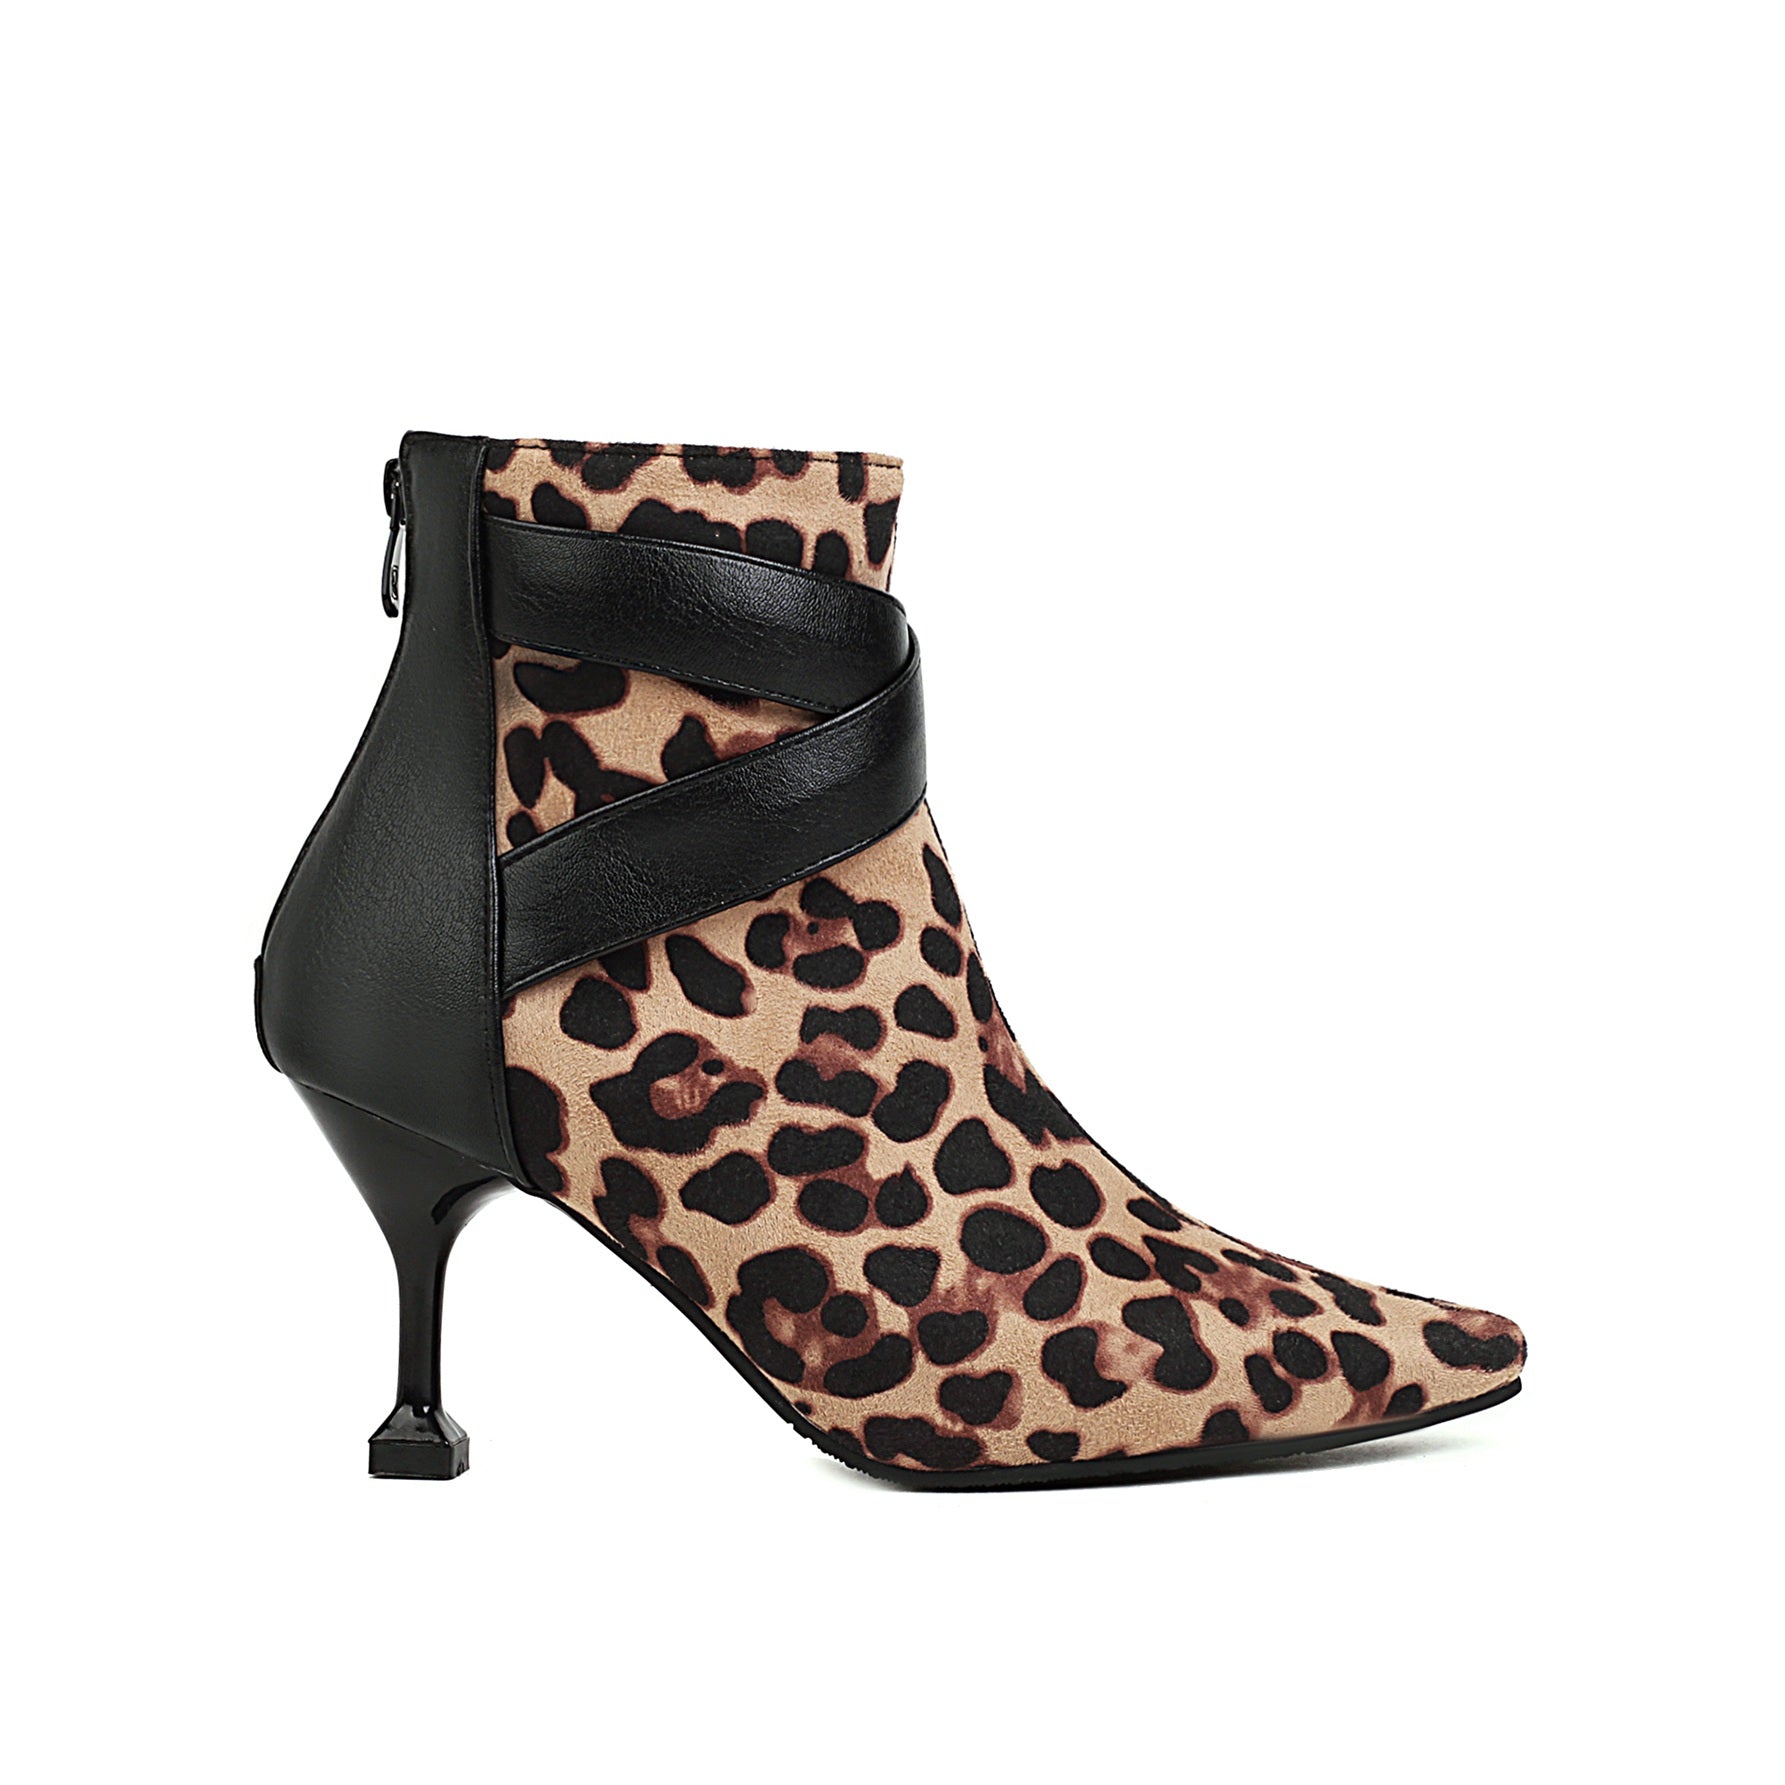 Bigsizeheels Sexy pointy zipper ankle boots - Leopard freeshipping - bigsizeheel®-size5-size15 -All Plus Sizes Available!